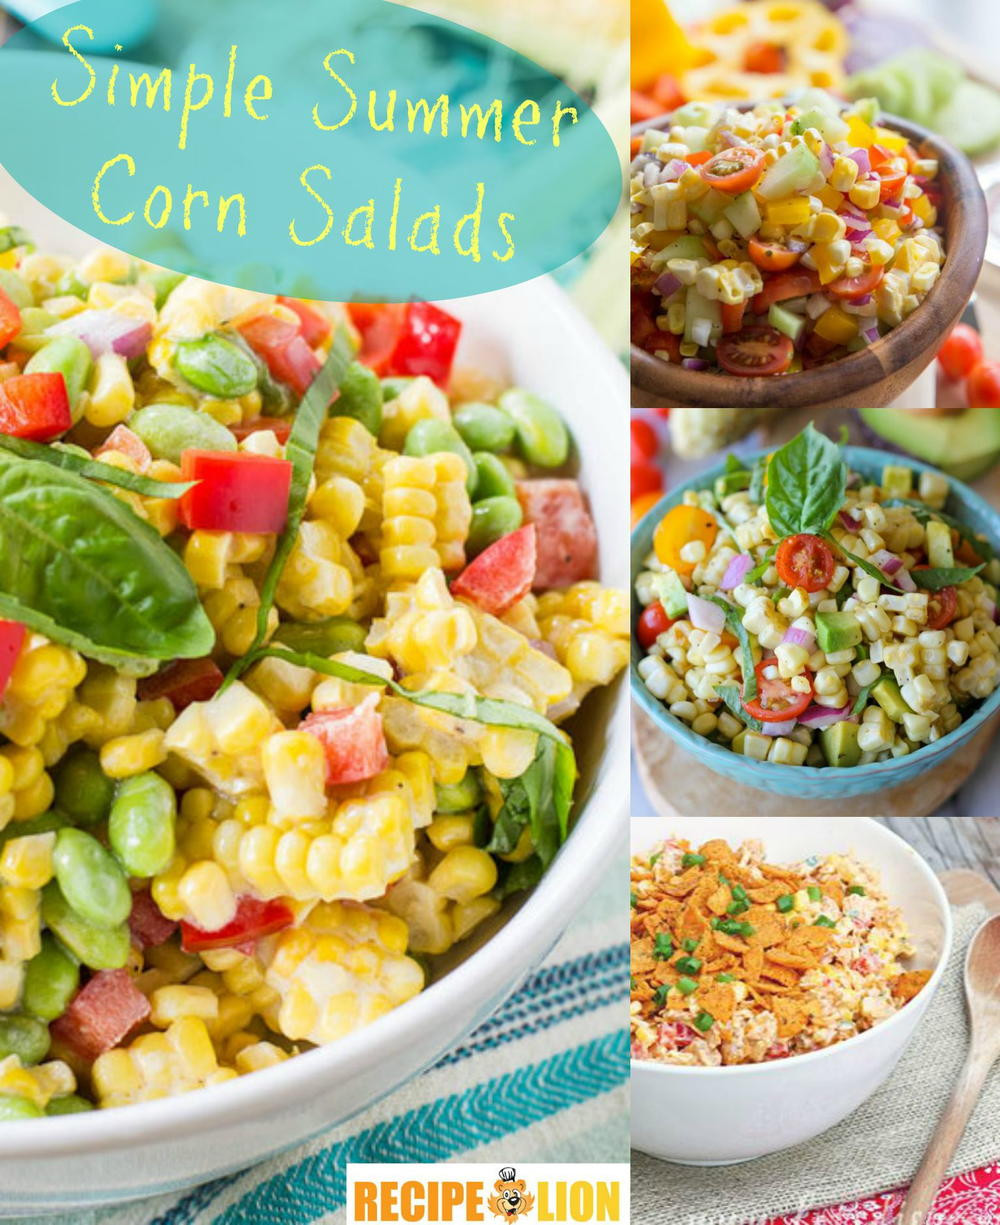 Cold Thanksgiving Side Dishes
 7 Cold Corn Salad Recipes for Your Summer Potluck